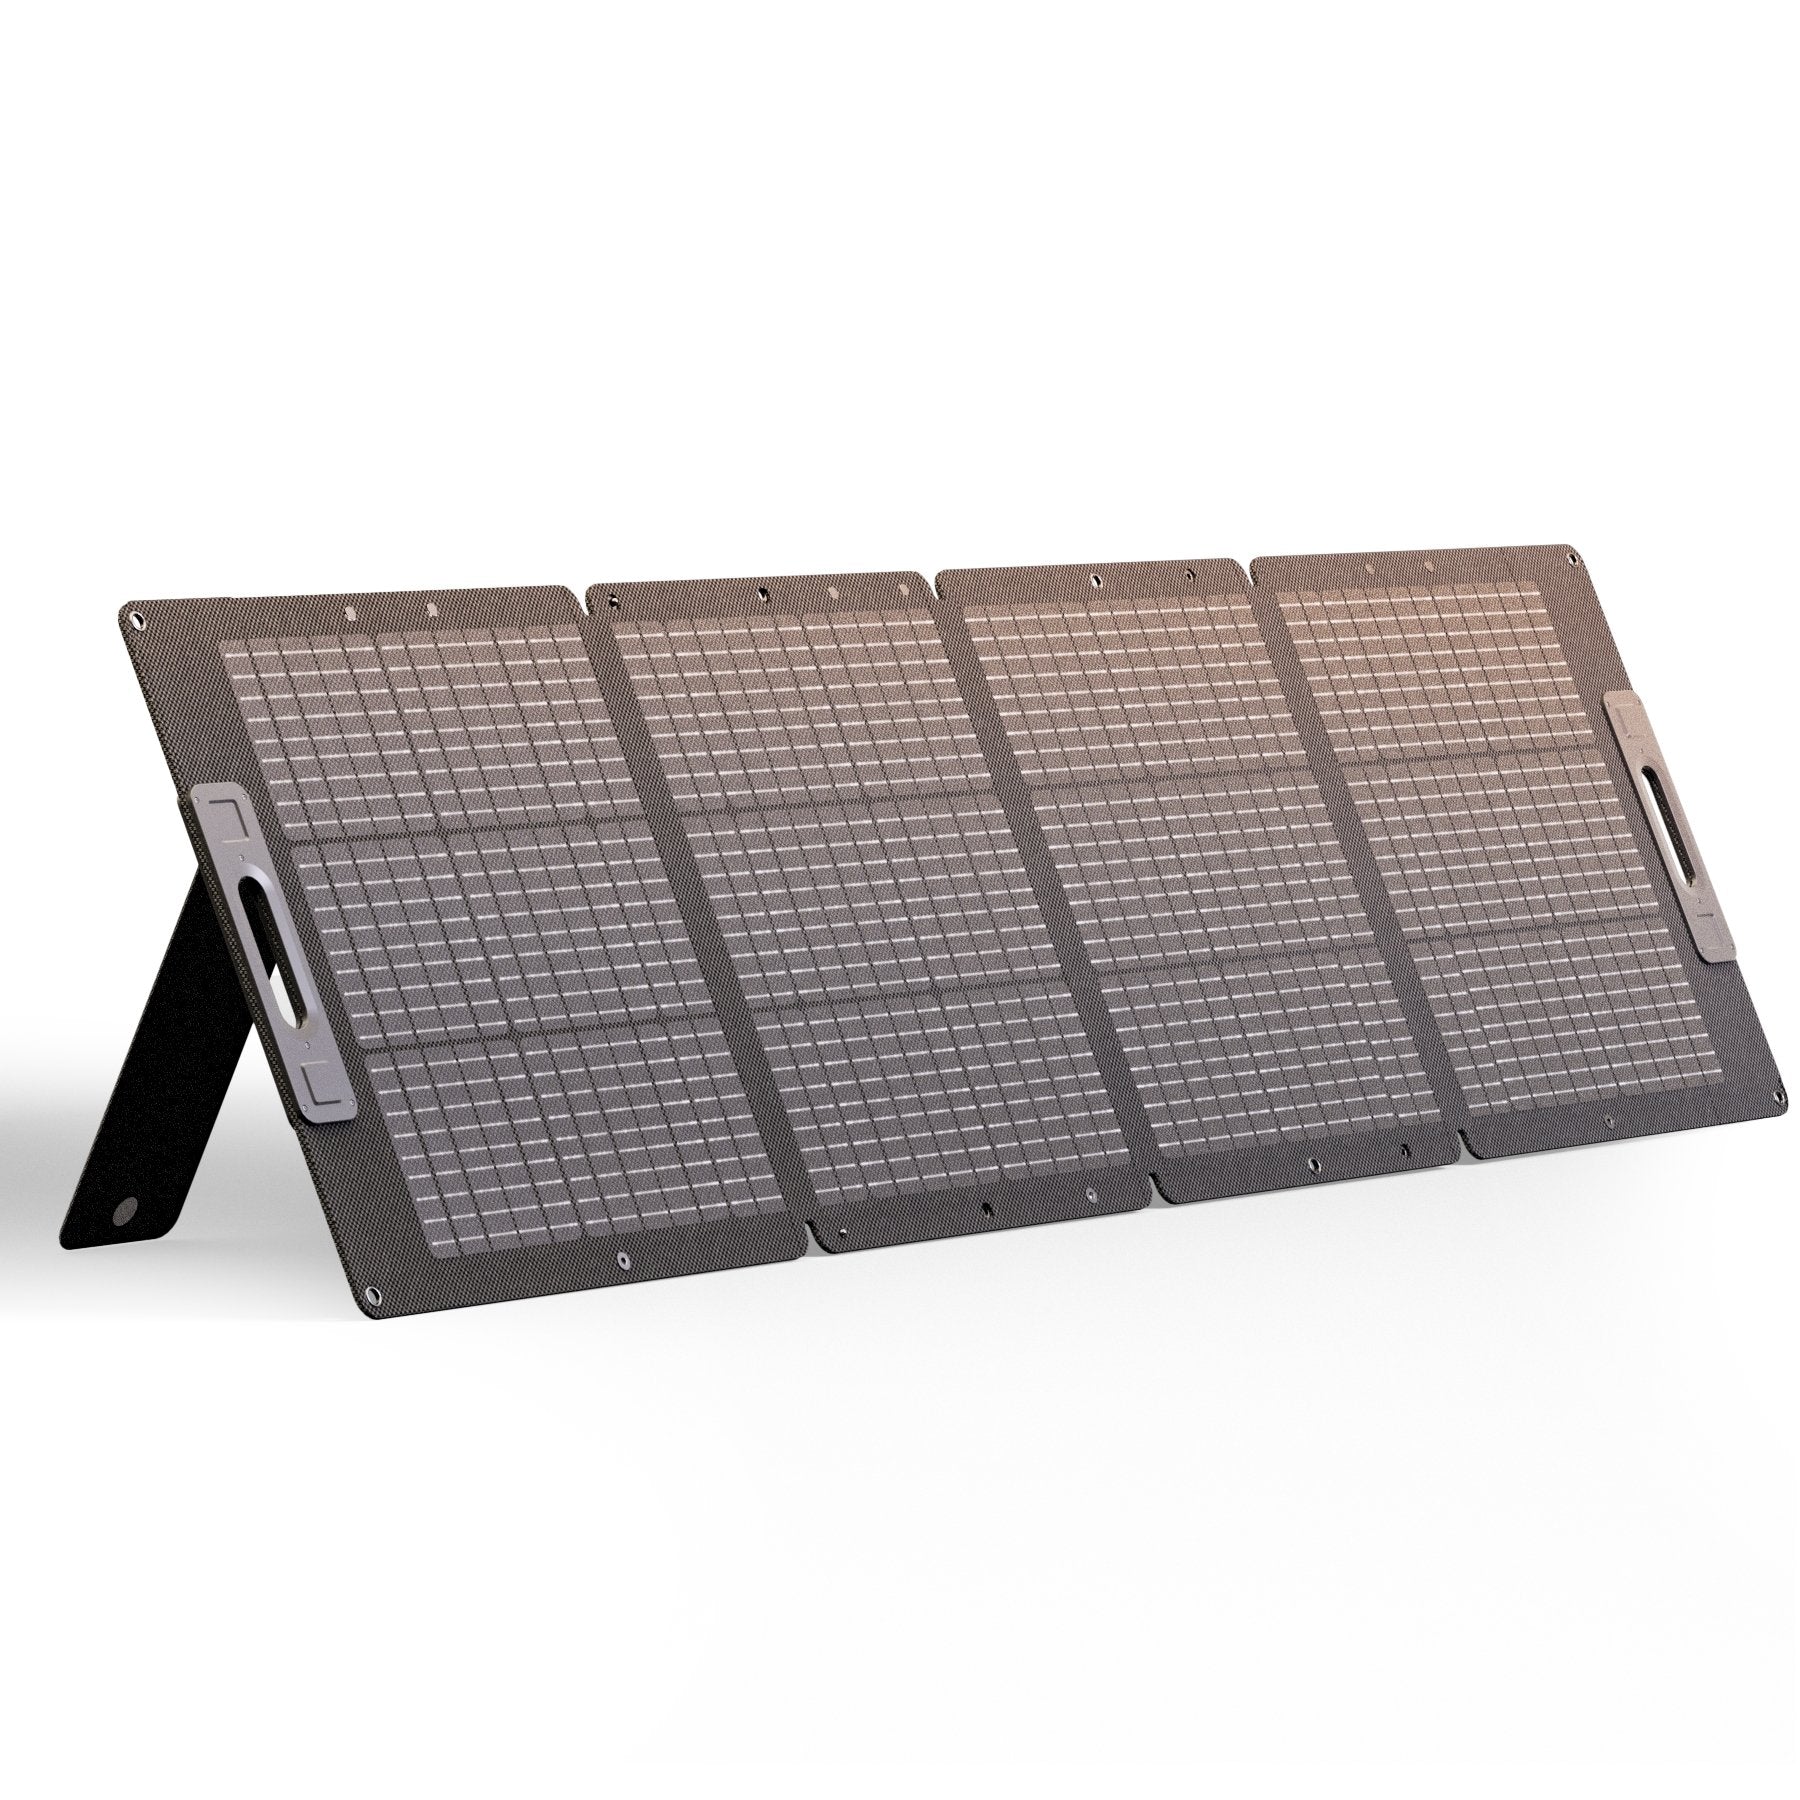 Rophie 200W Foldable Solar Panel Kit - Powerful, Portable, and Efficient - Rophie